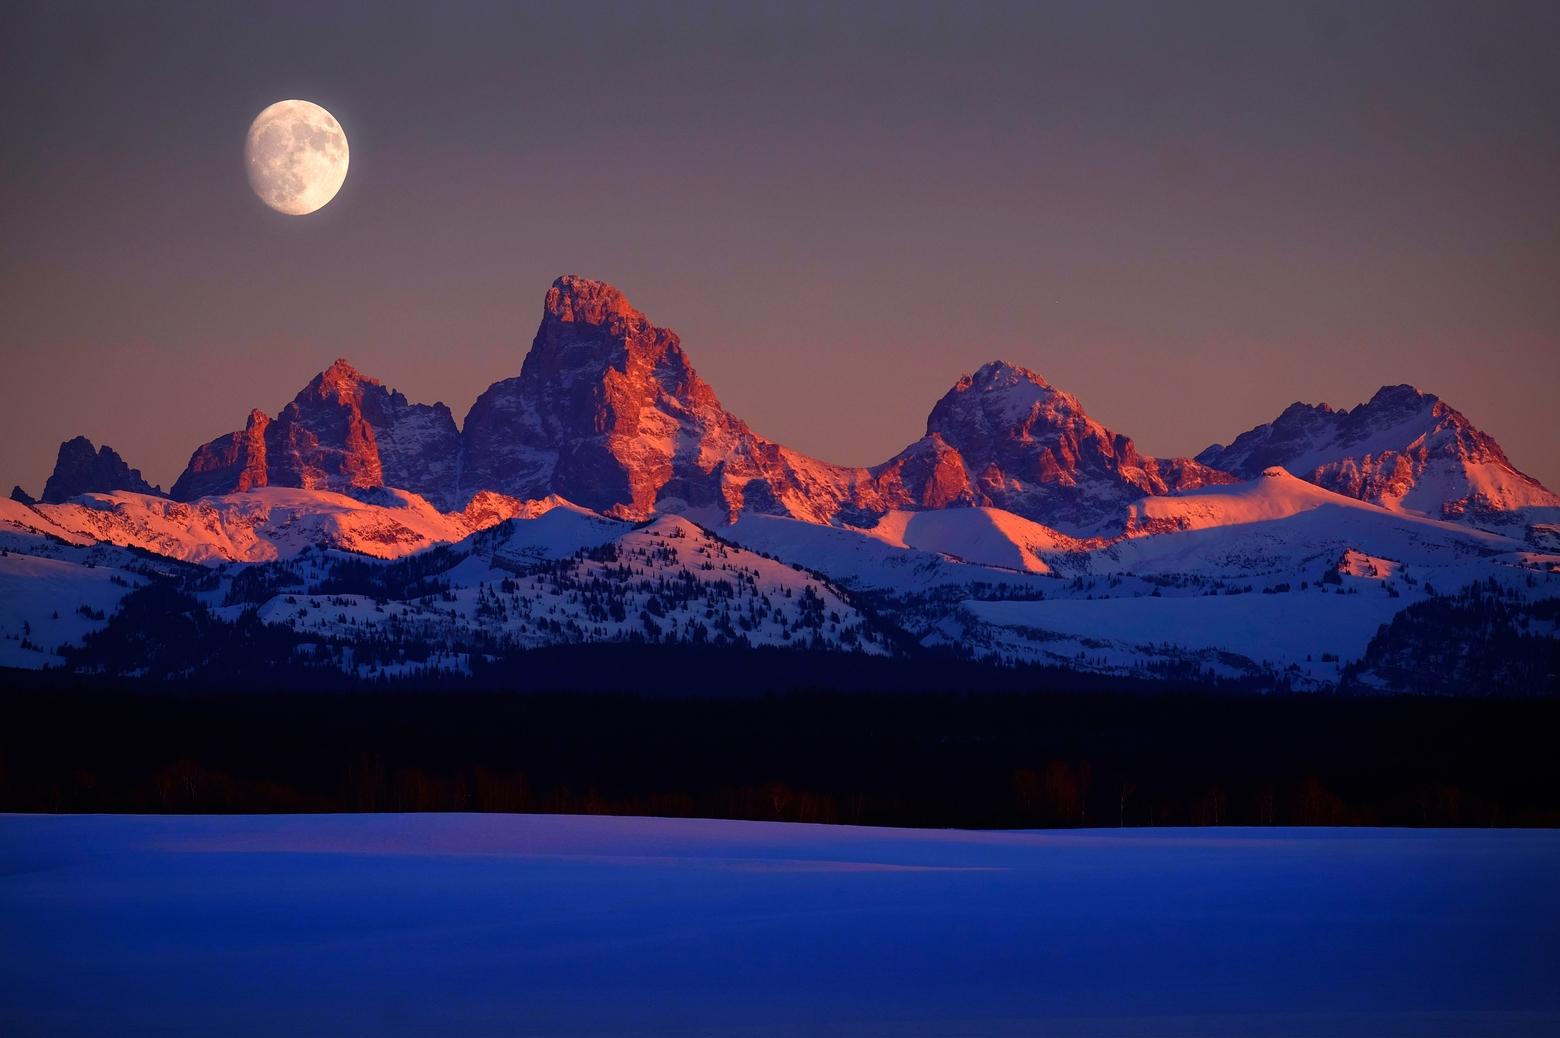 Known for its pastoral setting and sense of wildness that extends from Teton Valley, Idaho northward to Yellowstone and beyond, the west side of the Tetons have a different vibe and sense of community from what's found on the other side of the mountains in Jackson Hole.  Here, amid moonrise, sunset casts the summits in alpenglow. Photo by Lane V. Erickson/Shutterstock ID: 1288379848